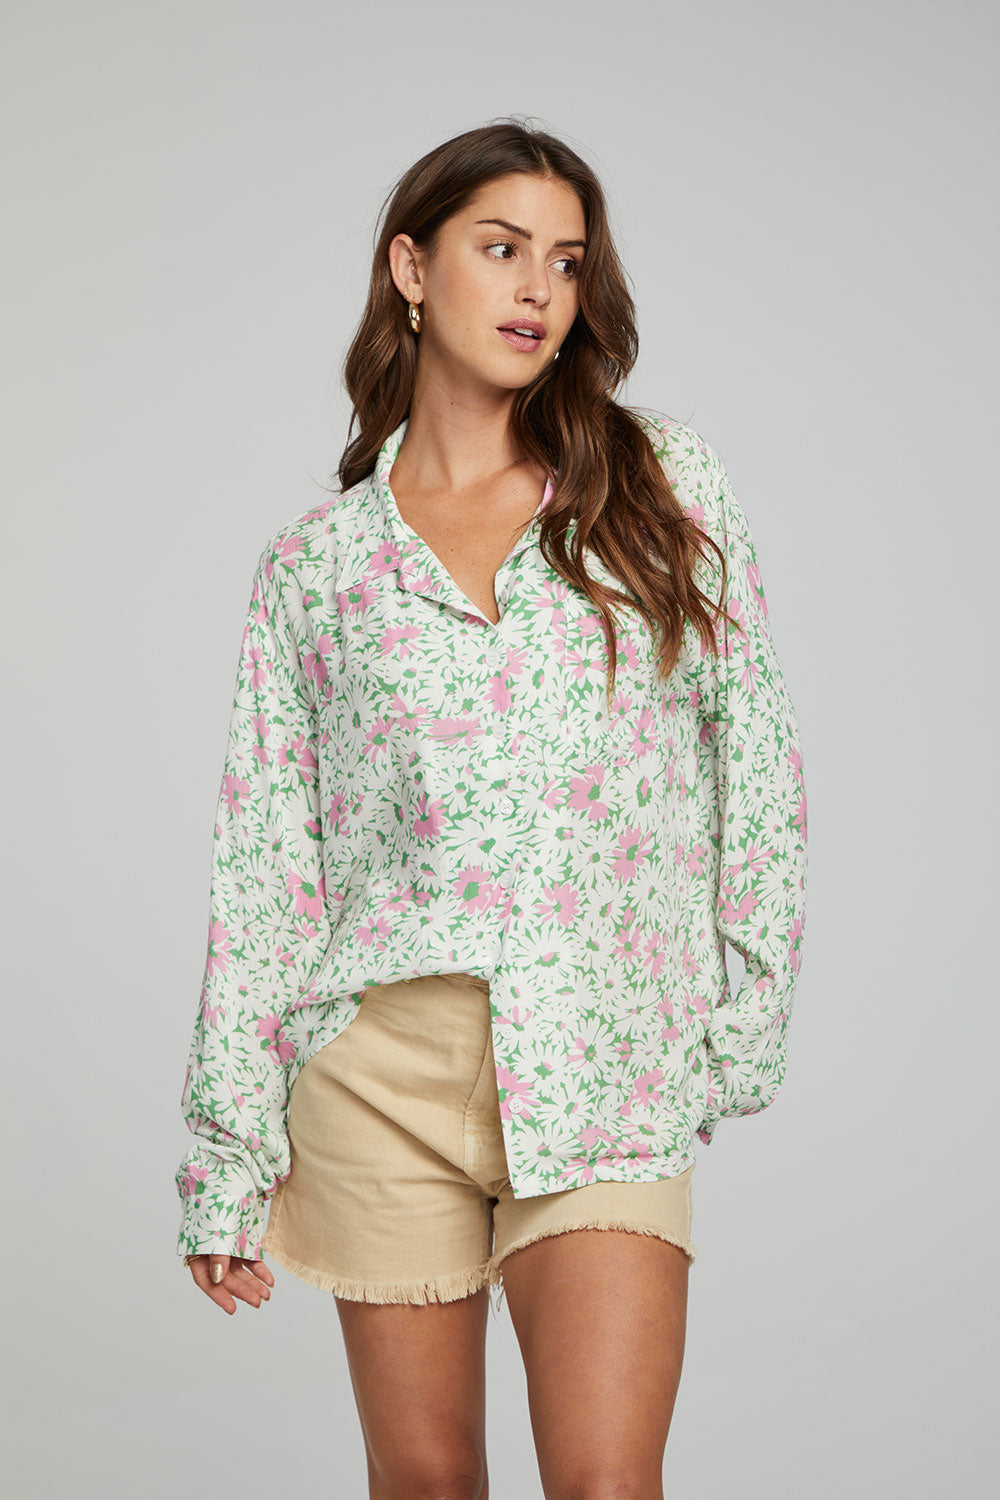 Saville Button Down - Grass Daisy Floral WOMENS chaserbrand